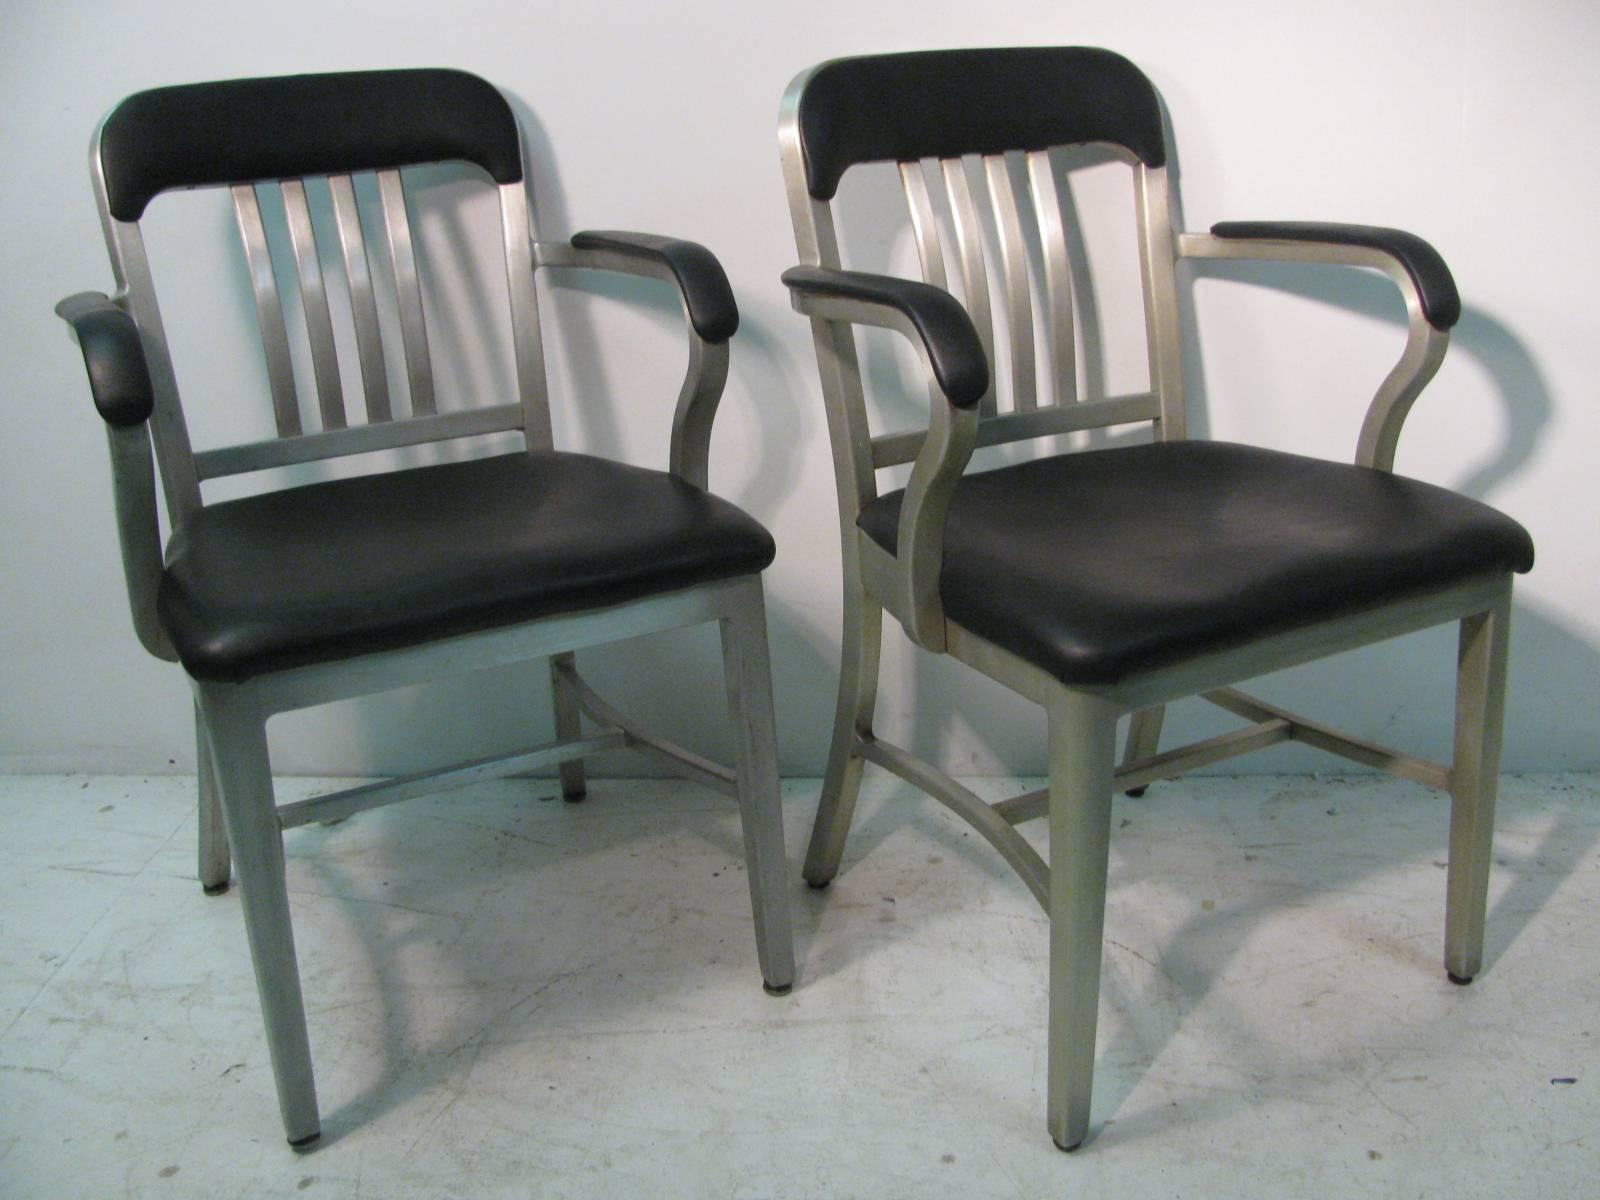 goodform chairs for sale